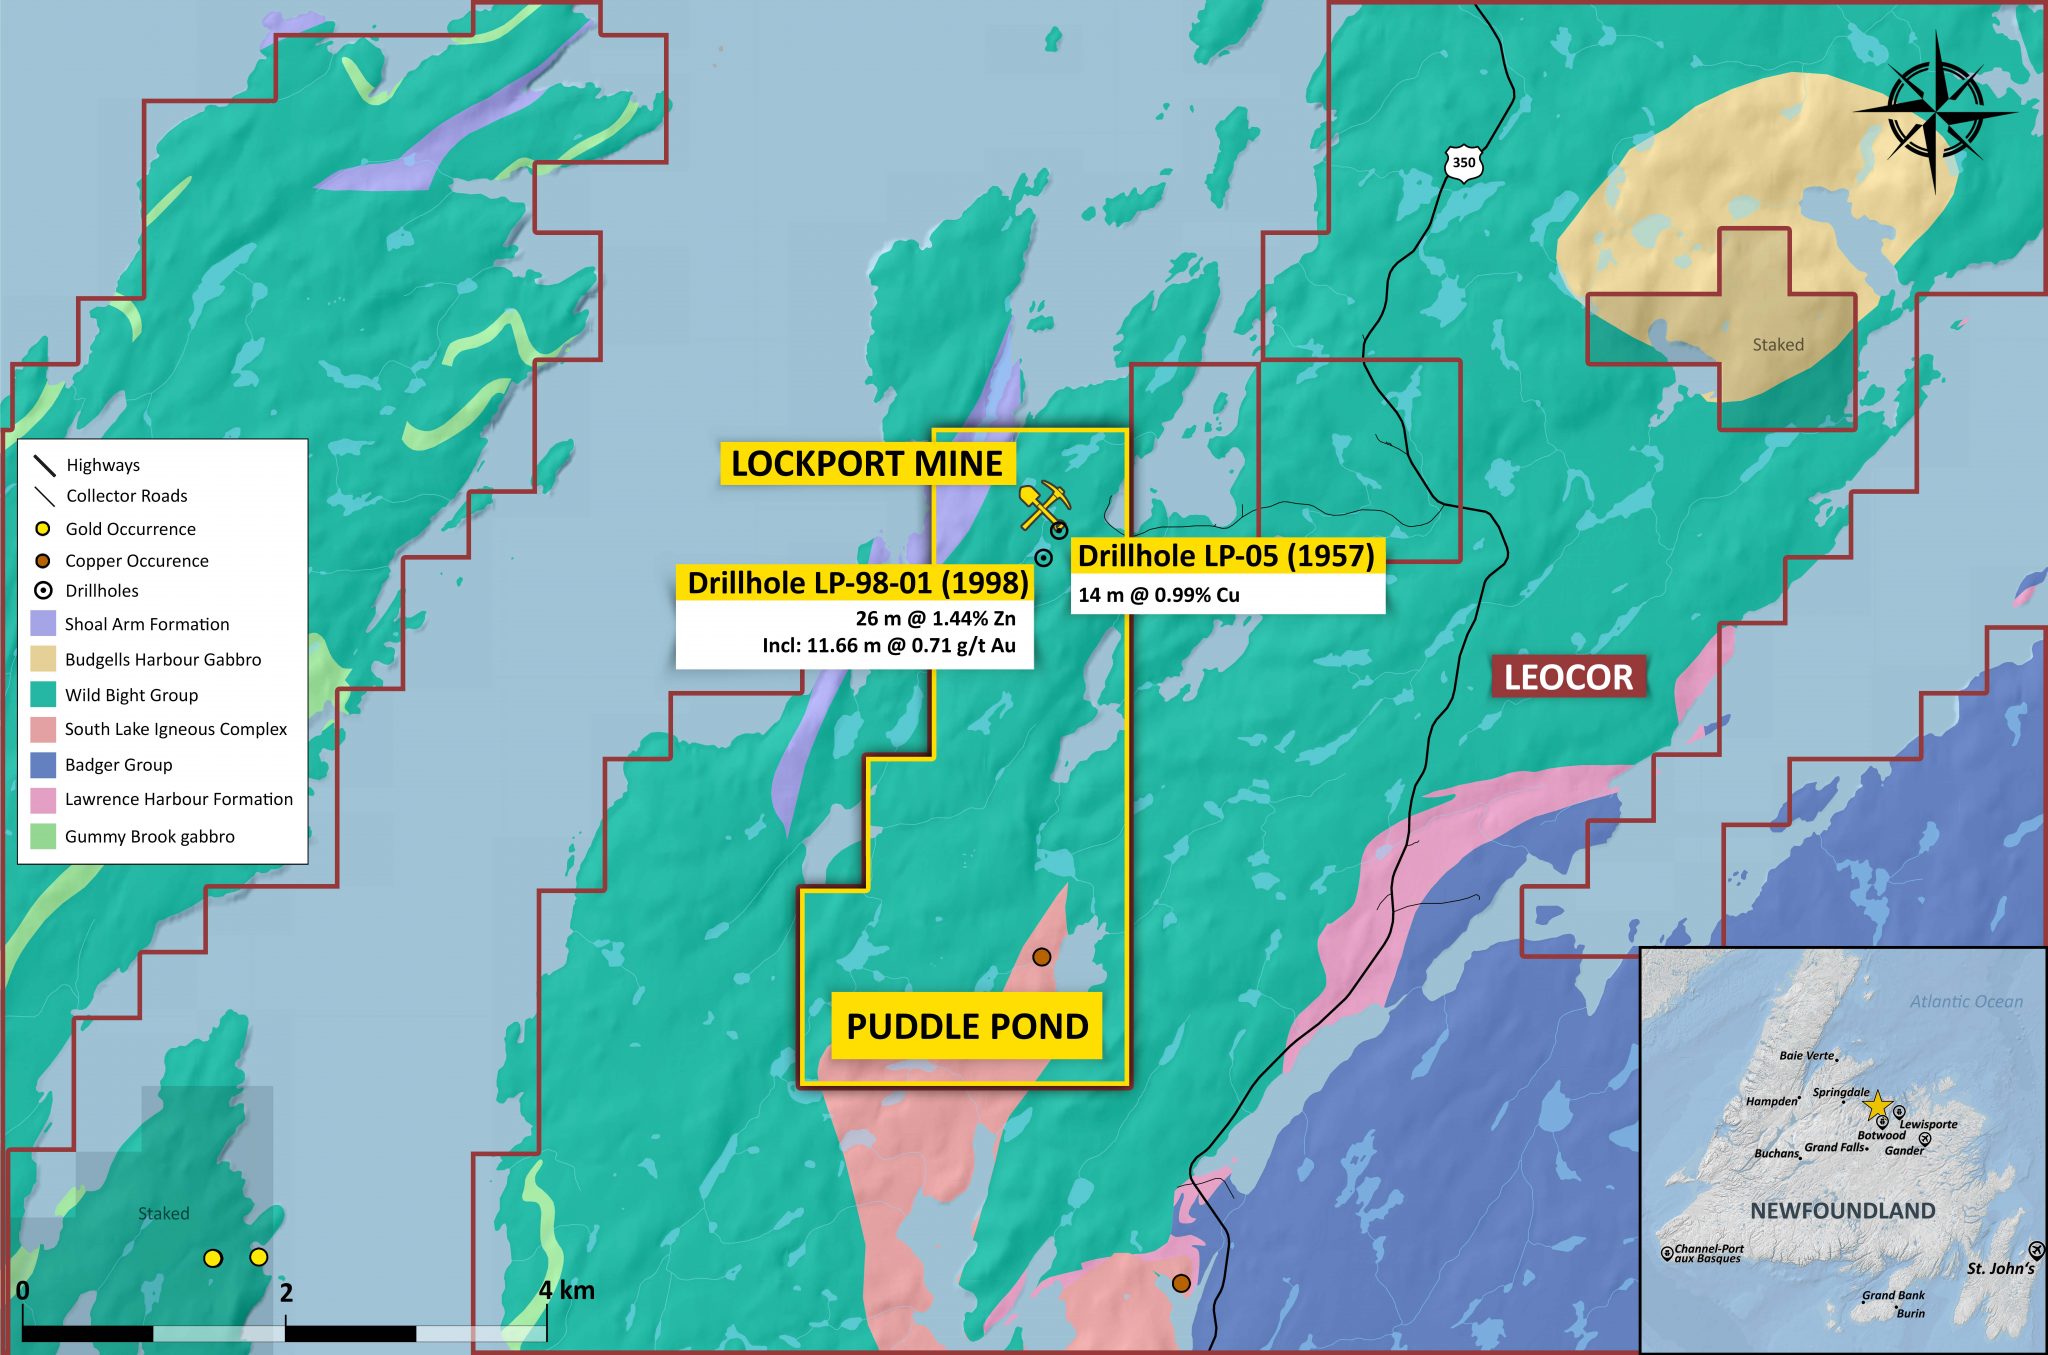 Lockport Project Puddle Pond Resources Inc.